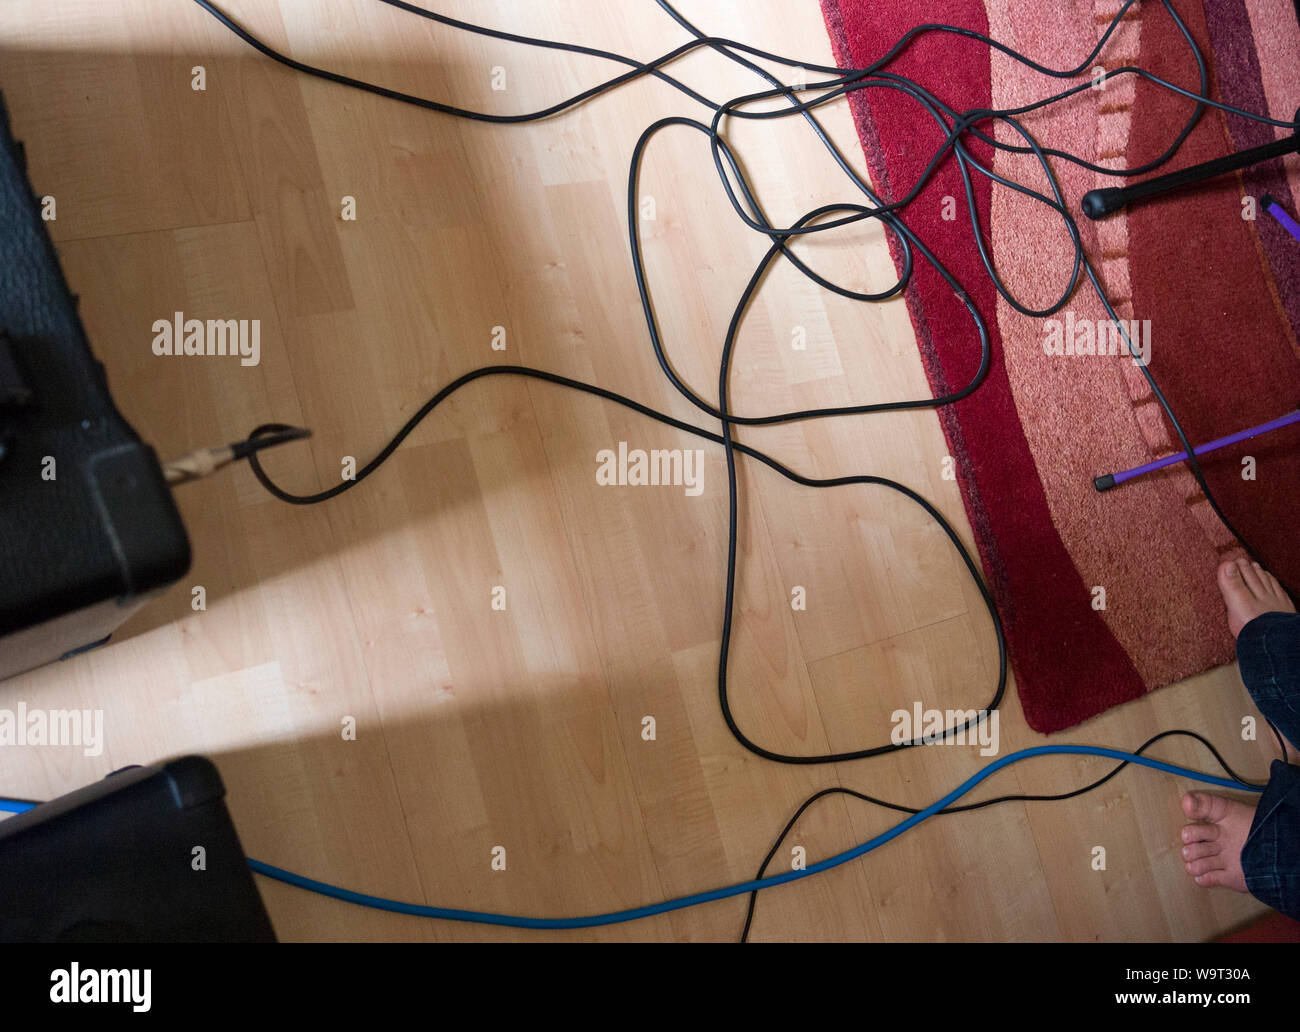 Guitar leads and amplifiers on a floor during a band rehearsal. Stock Photo